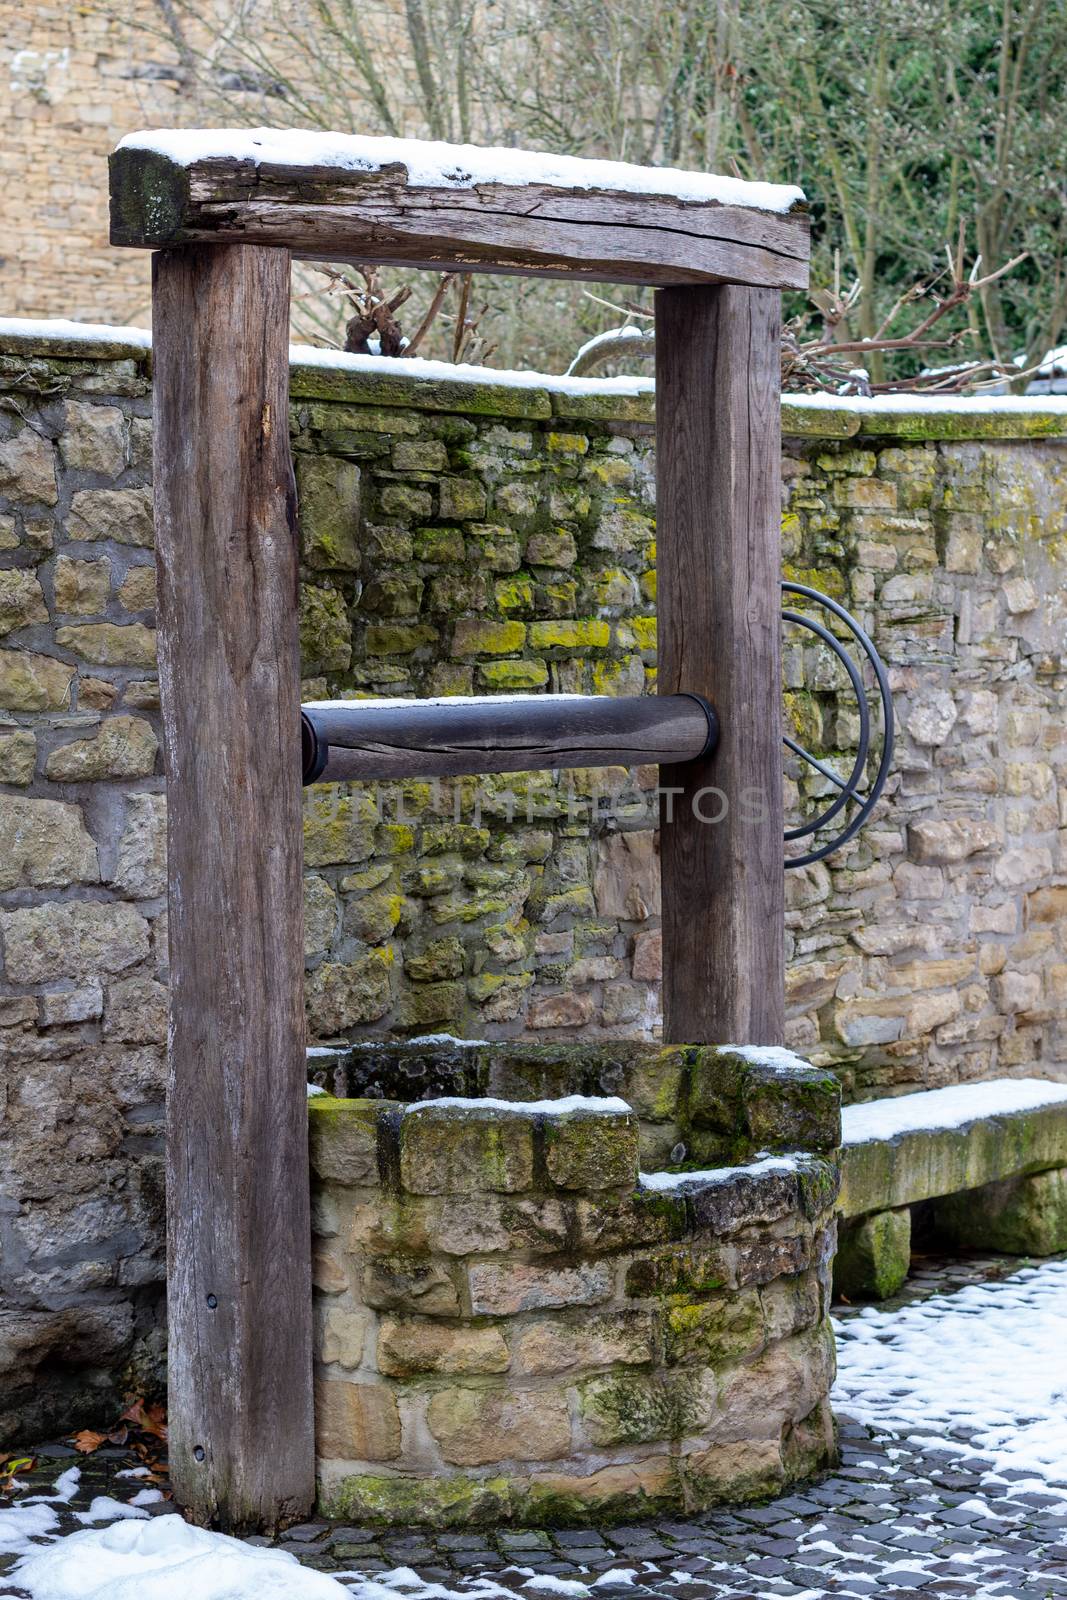 Historic water supply well in the old town of Meisenheim by reinerc